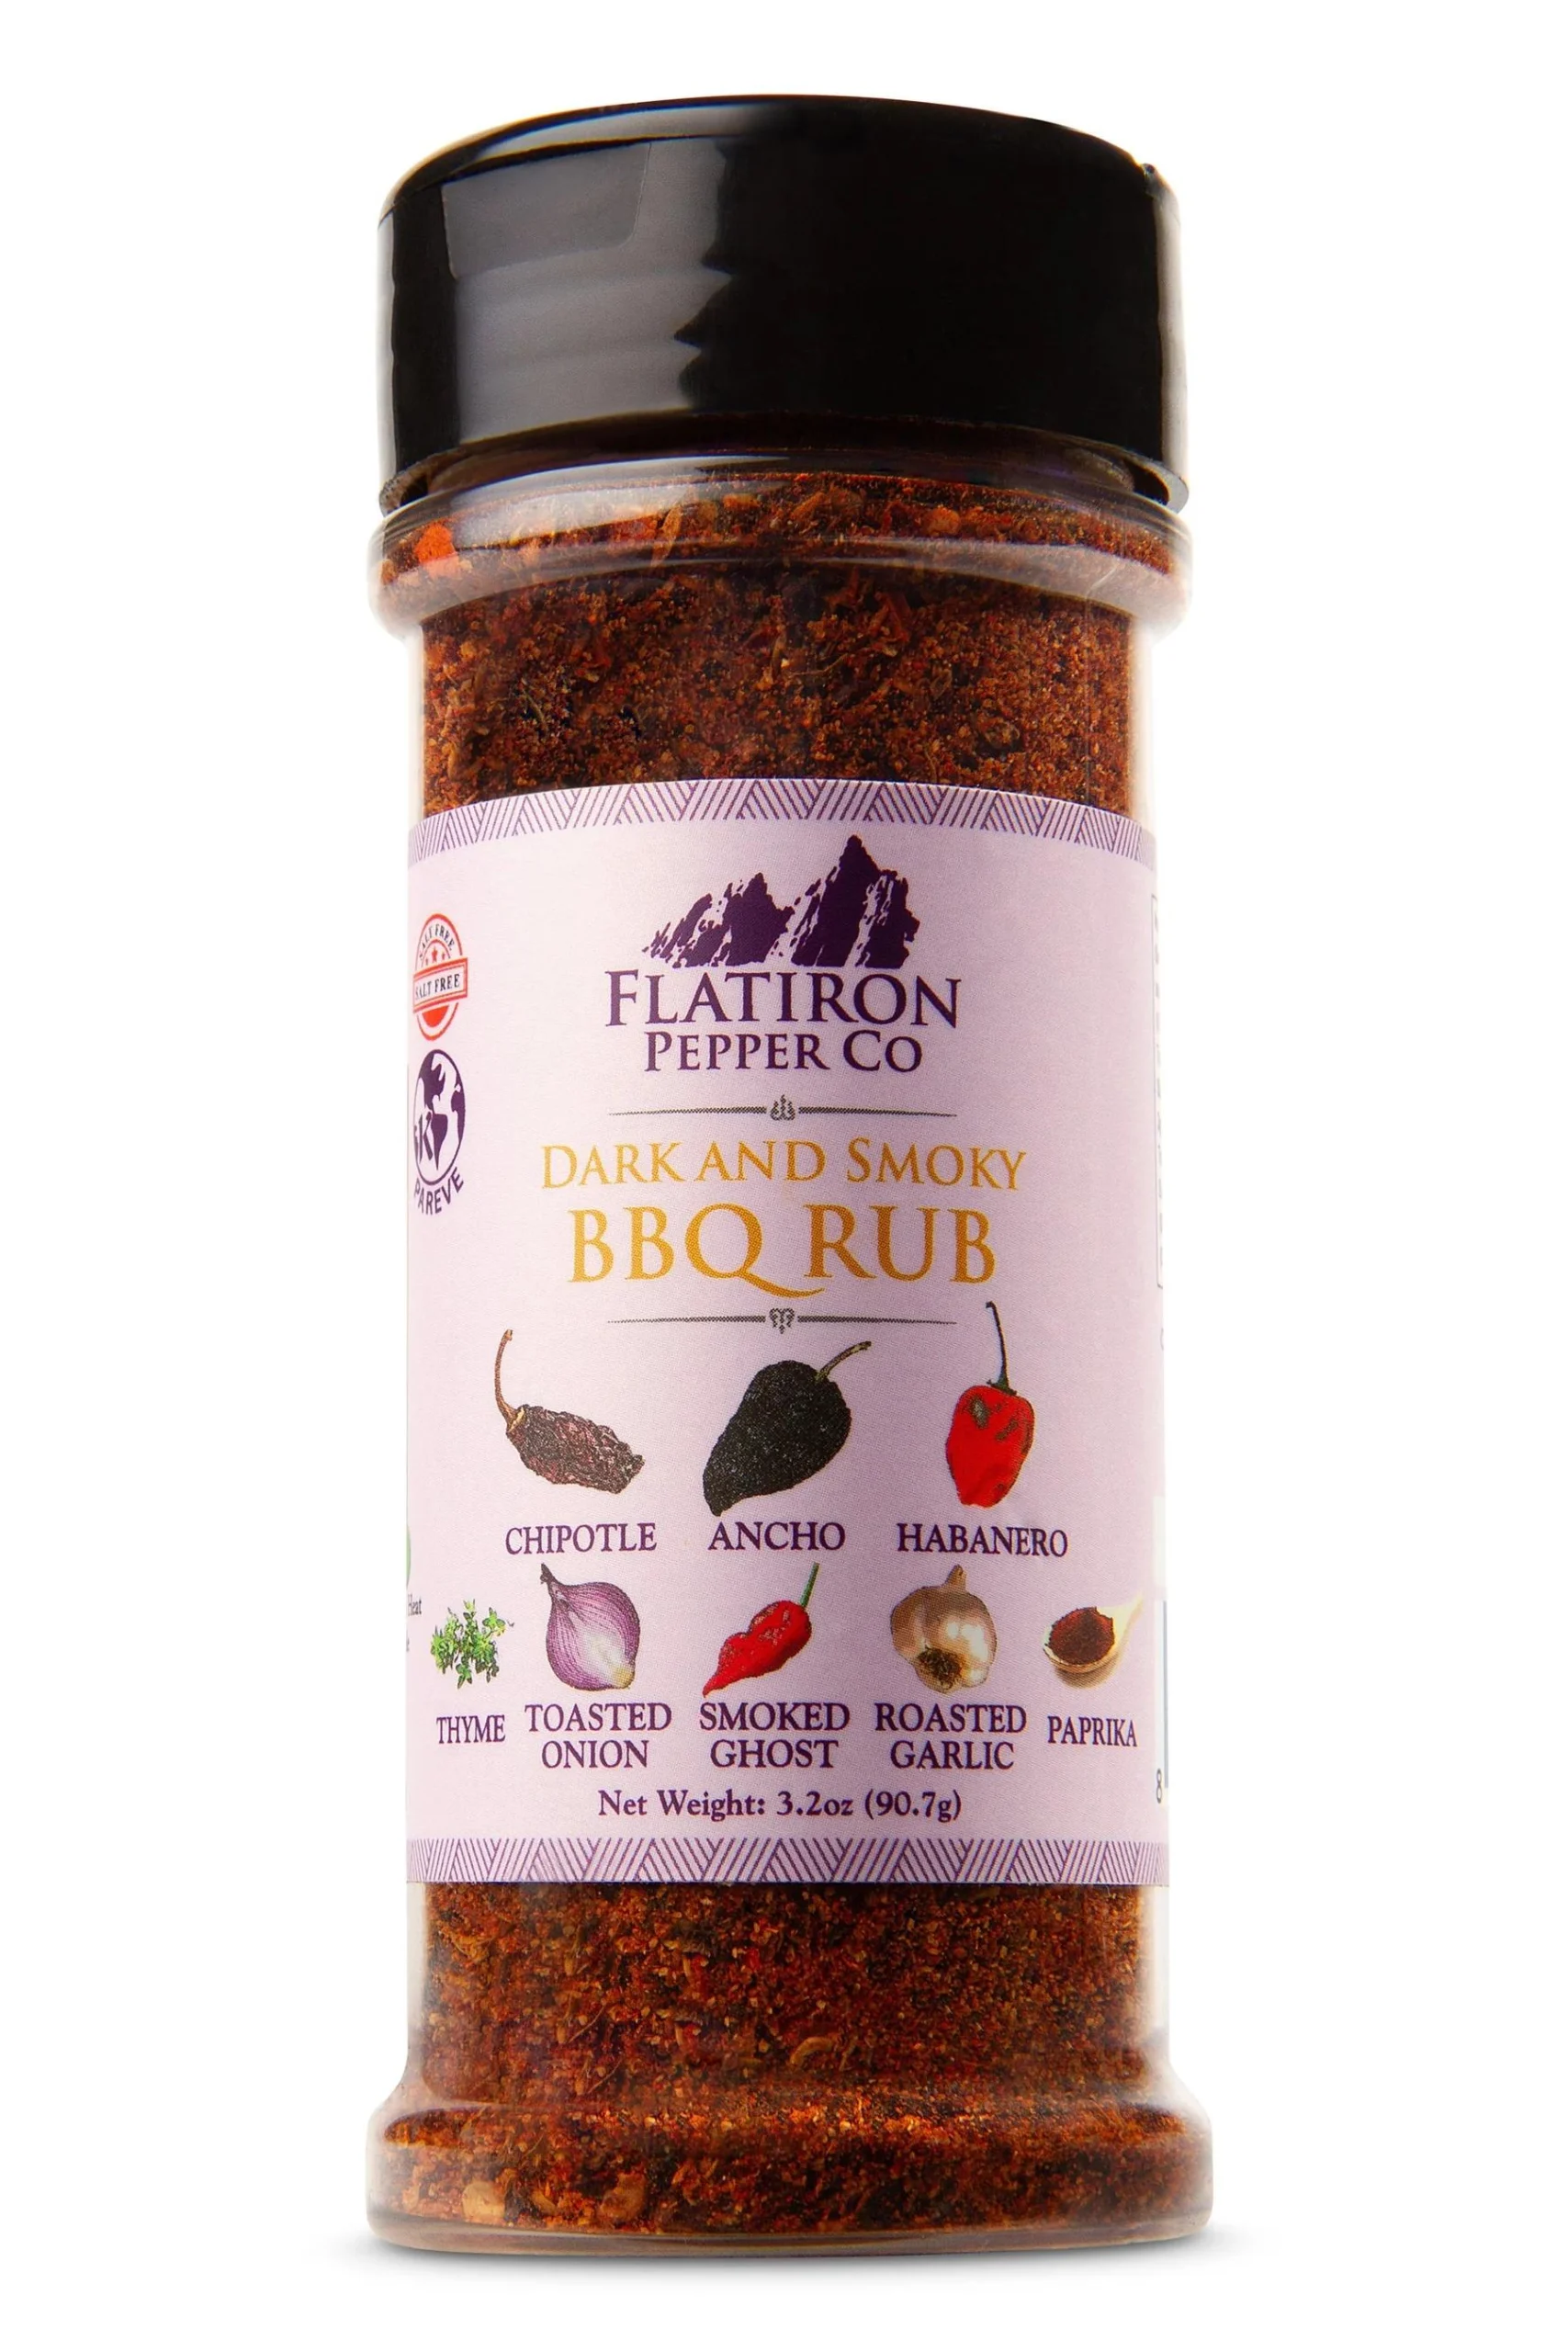 smoked bbq rub - What's the difference between a BBQ seasoning in a BBQ rub